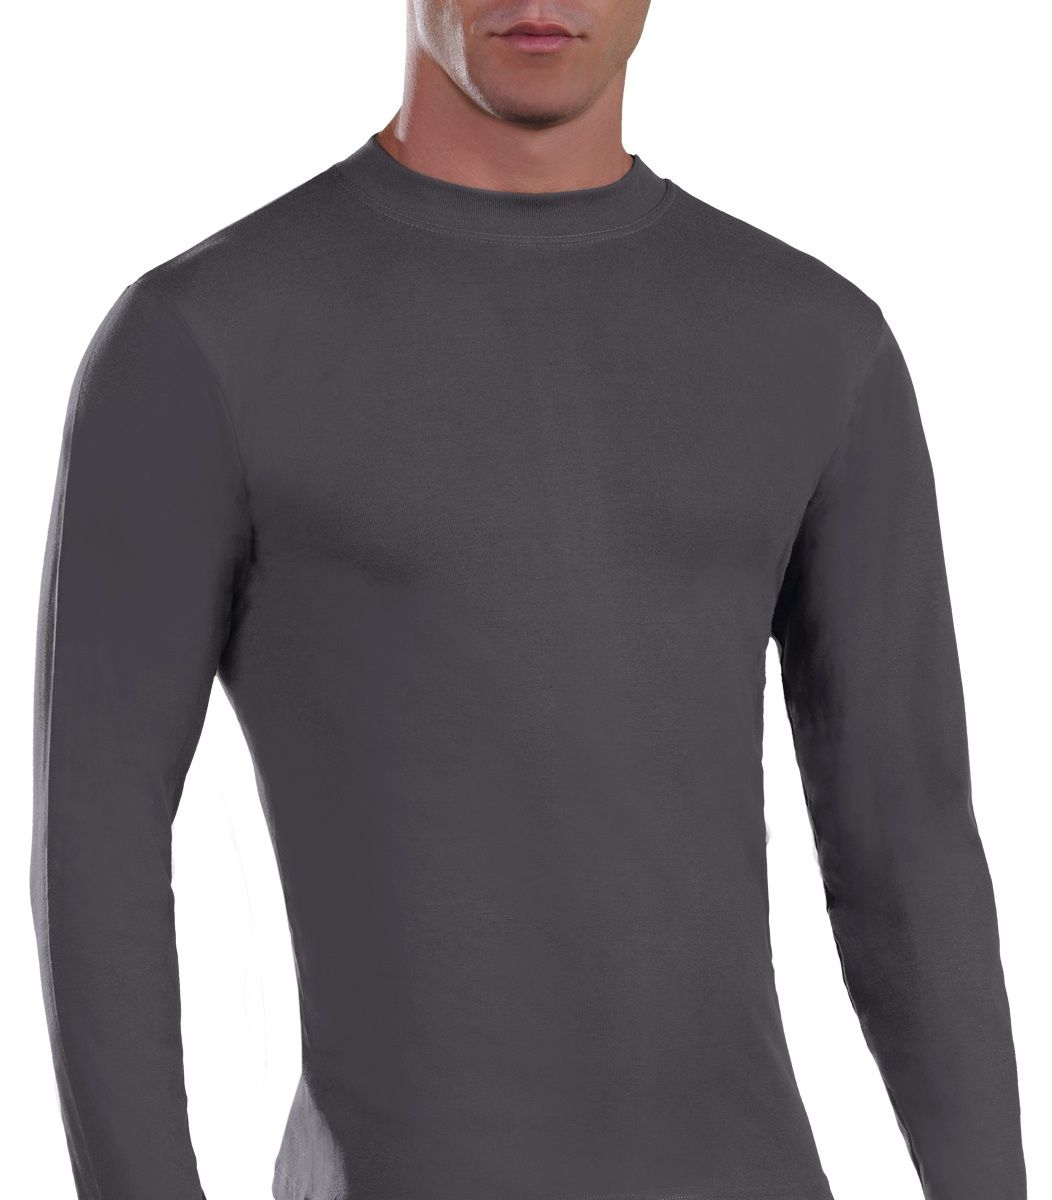 Mens Long sleeve, crew neck, charcoal